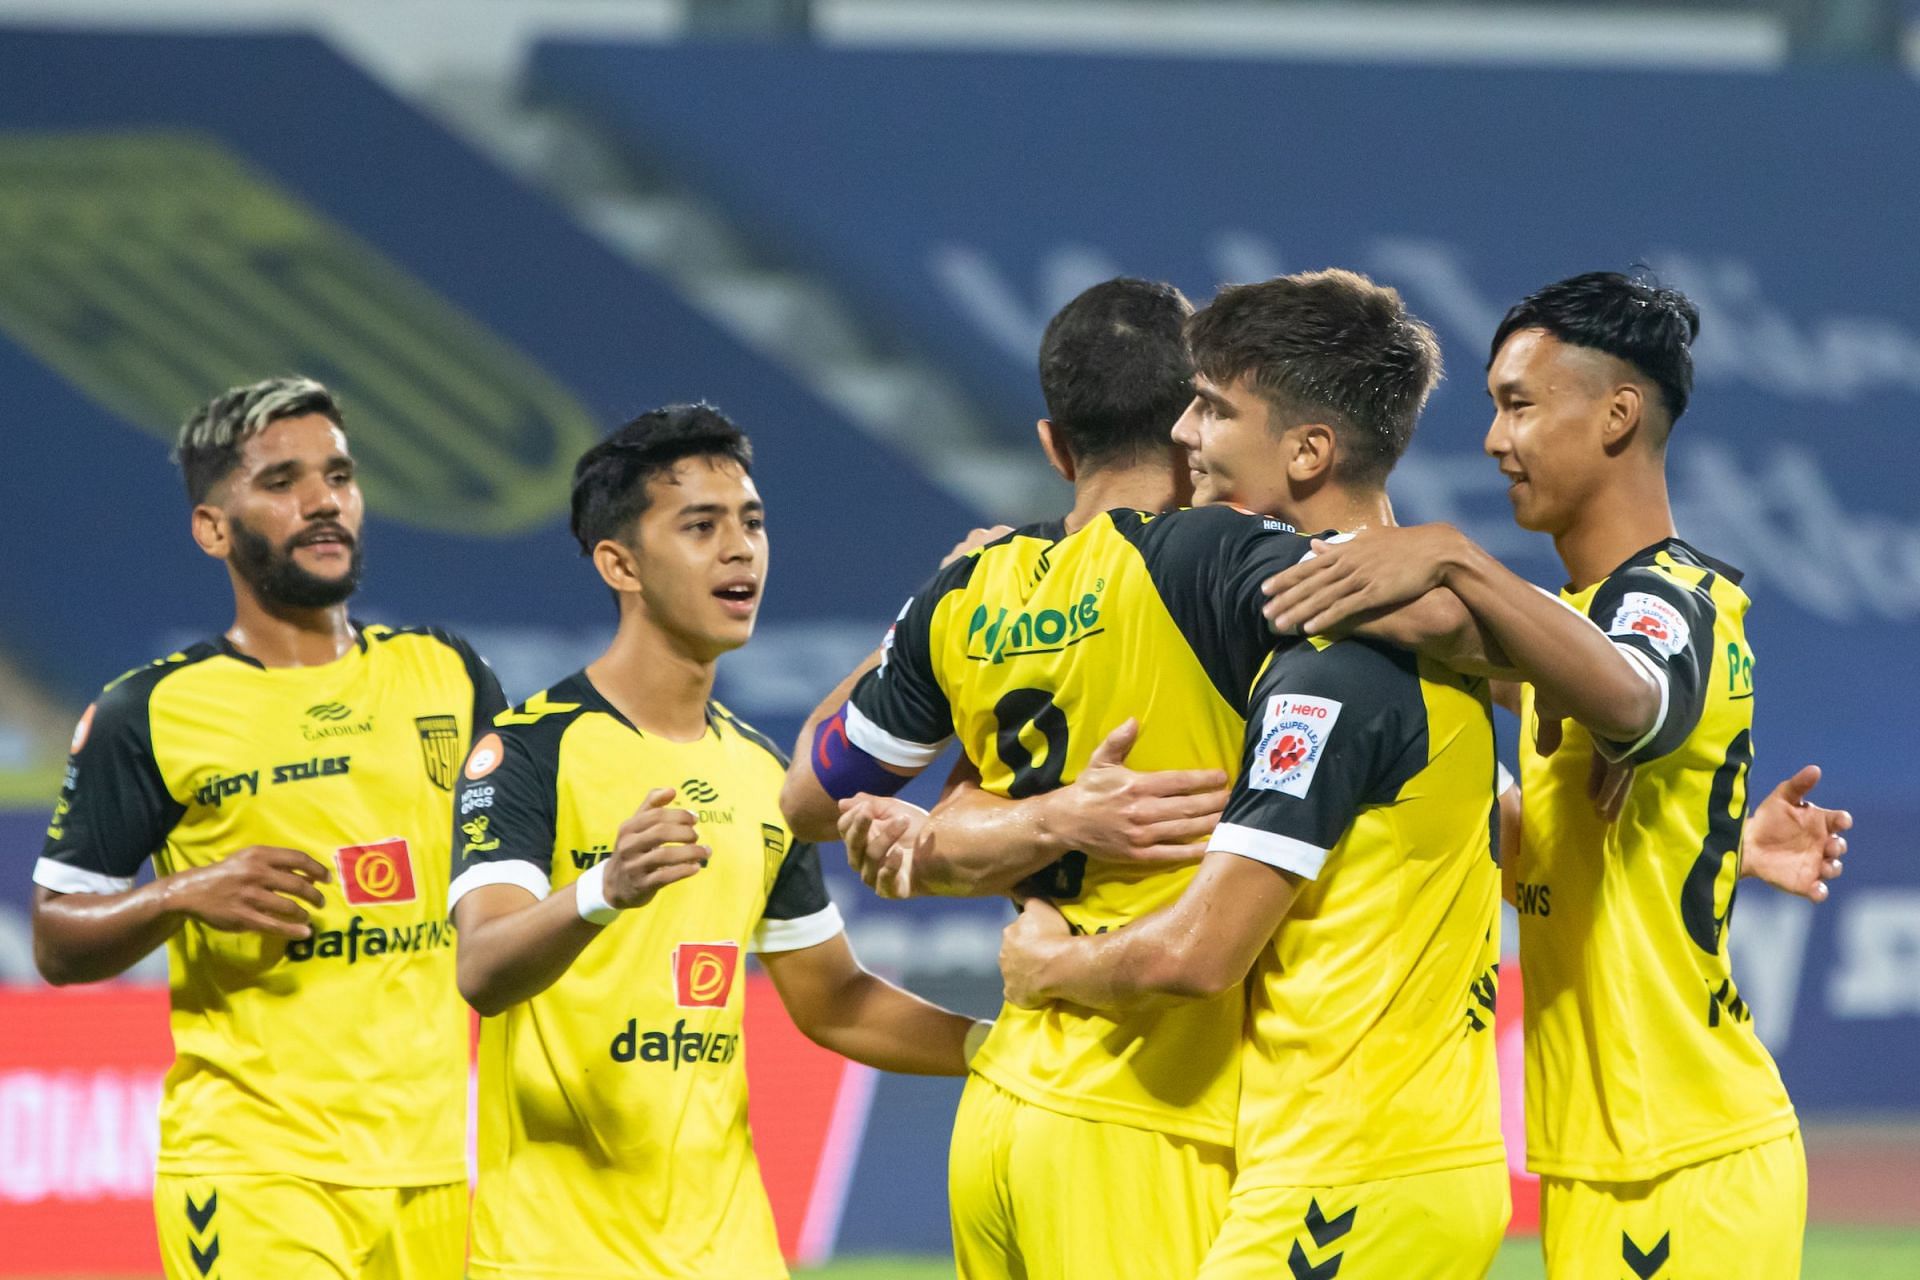 HFC players celebrate after scoring the goal against ATKMB (ISL).